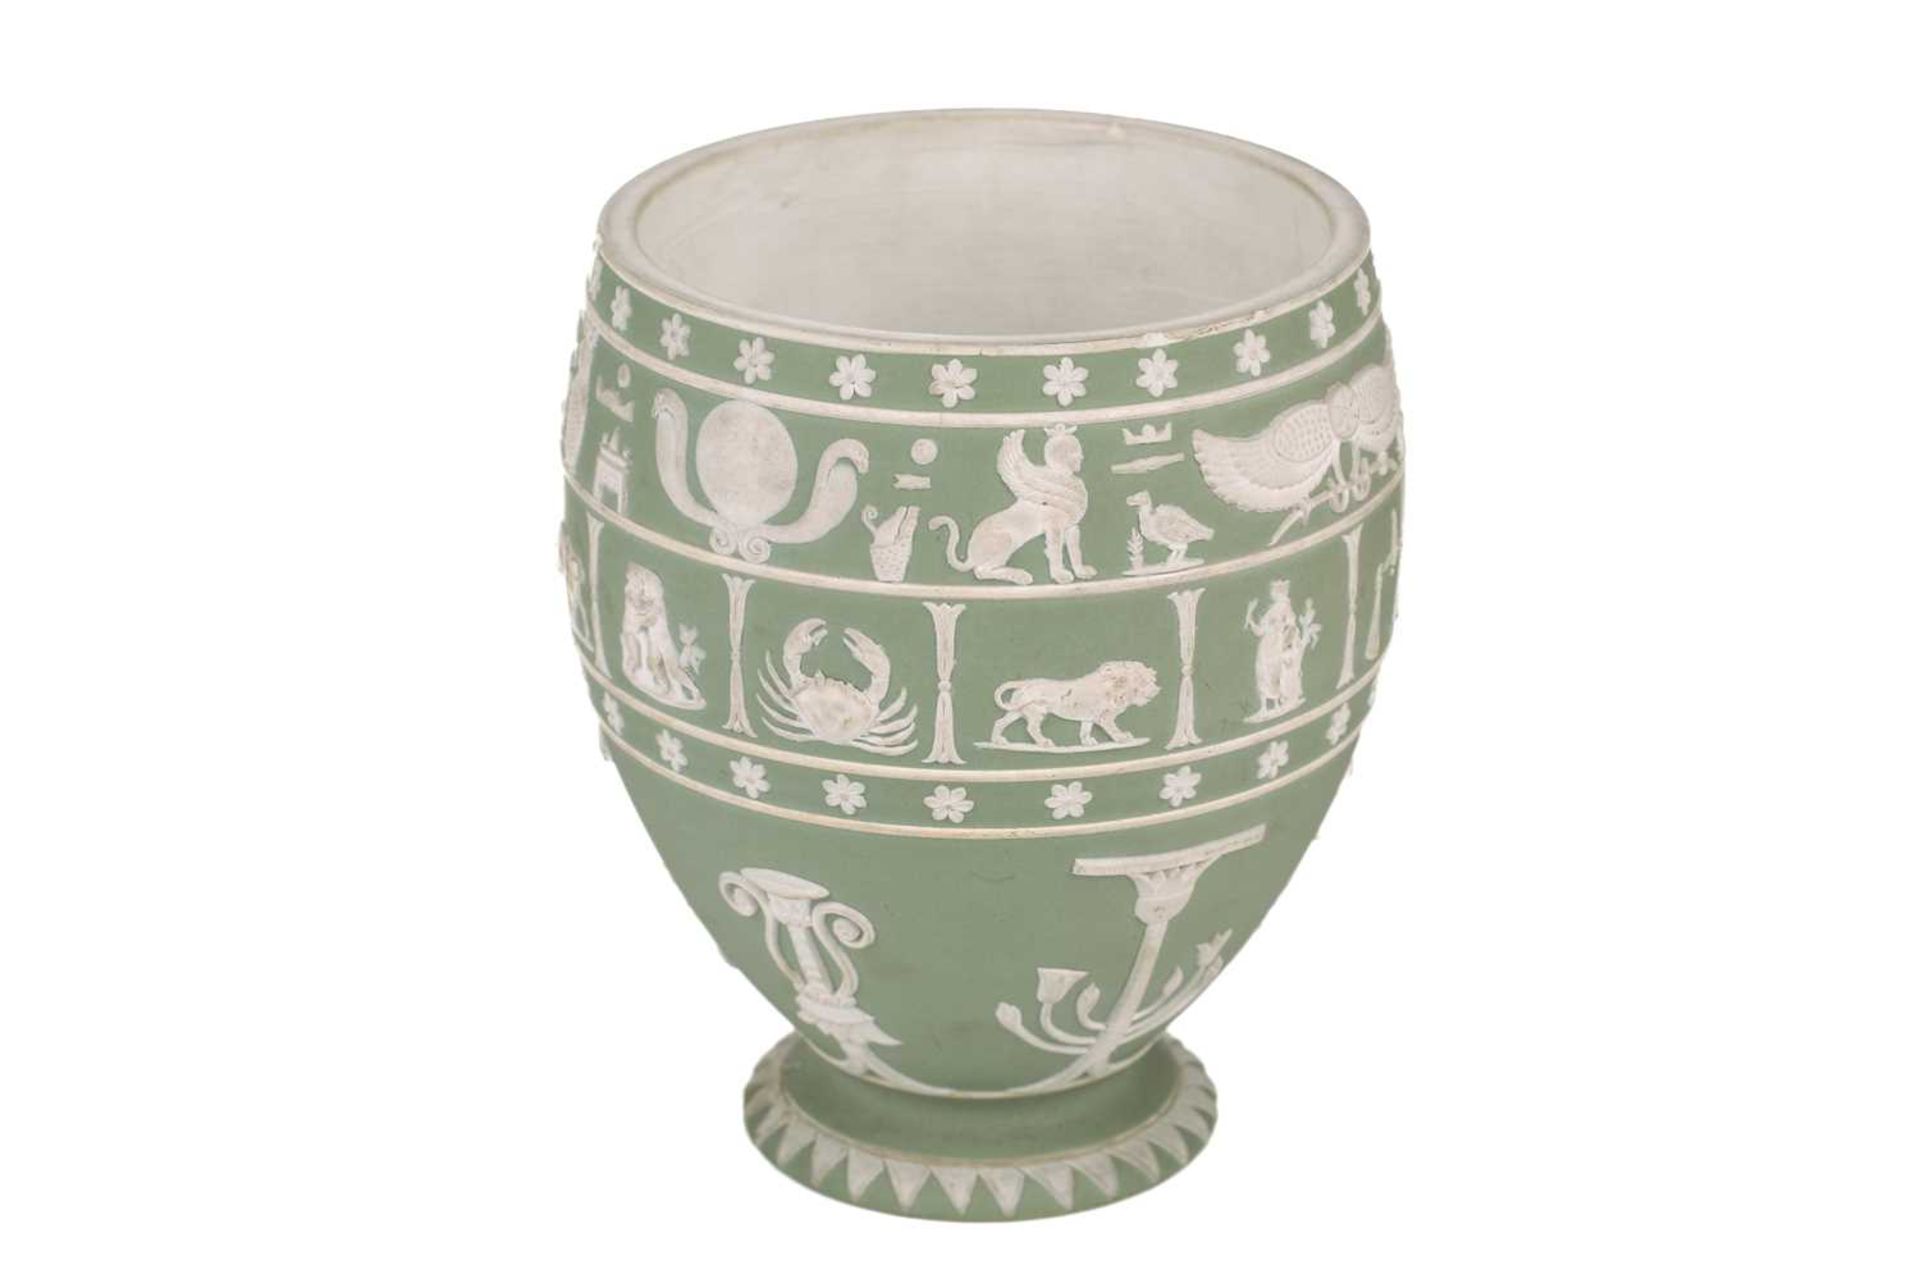 A 19th-century Wedgwood sage green Jasper dip canopic jar, (lacking original cover), modelled with